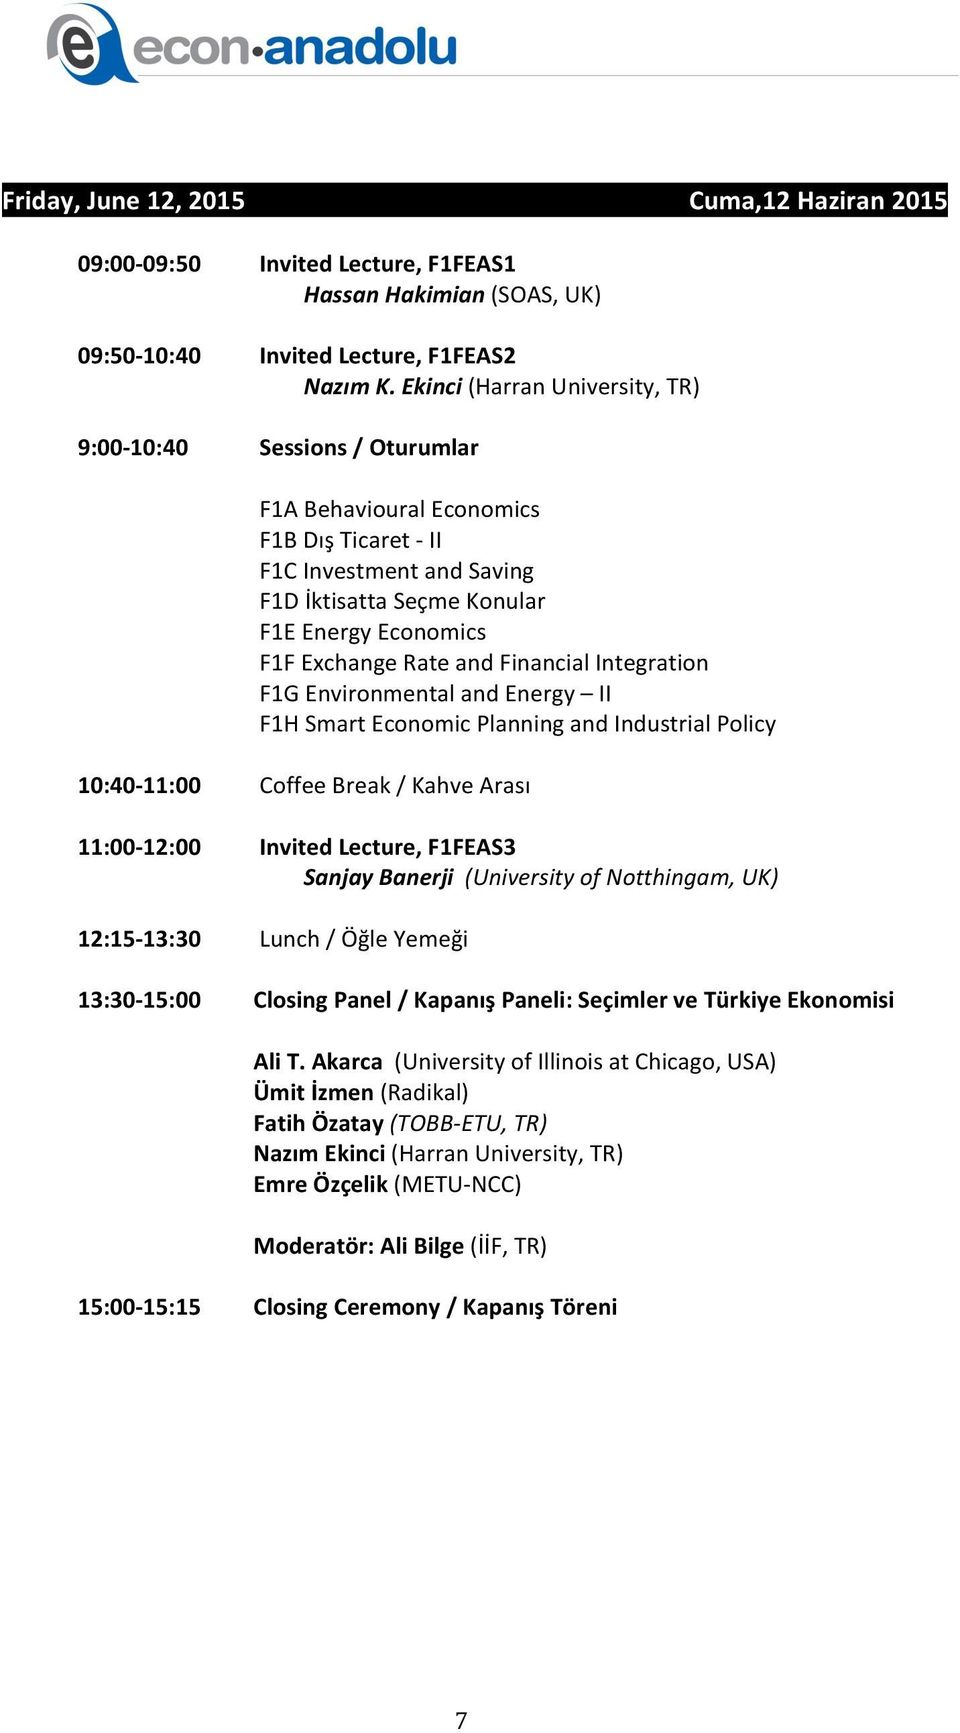 Financial Integration F1G Environmental and Energy II F1H Smart Economic Planning and Industrial Policy 10:40-11:00 11:00-12:00 12:15-13:30 13:30-15:00 Coffee Break / Kahve Arası Invited Lecture,